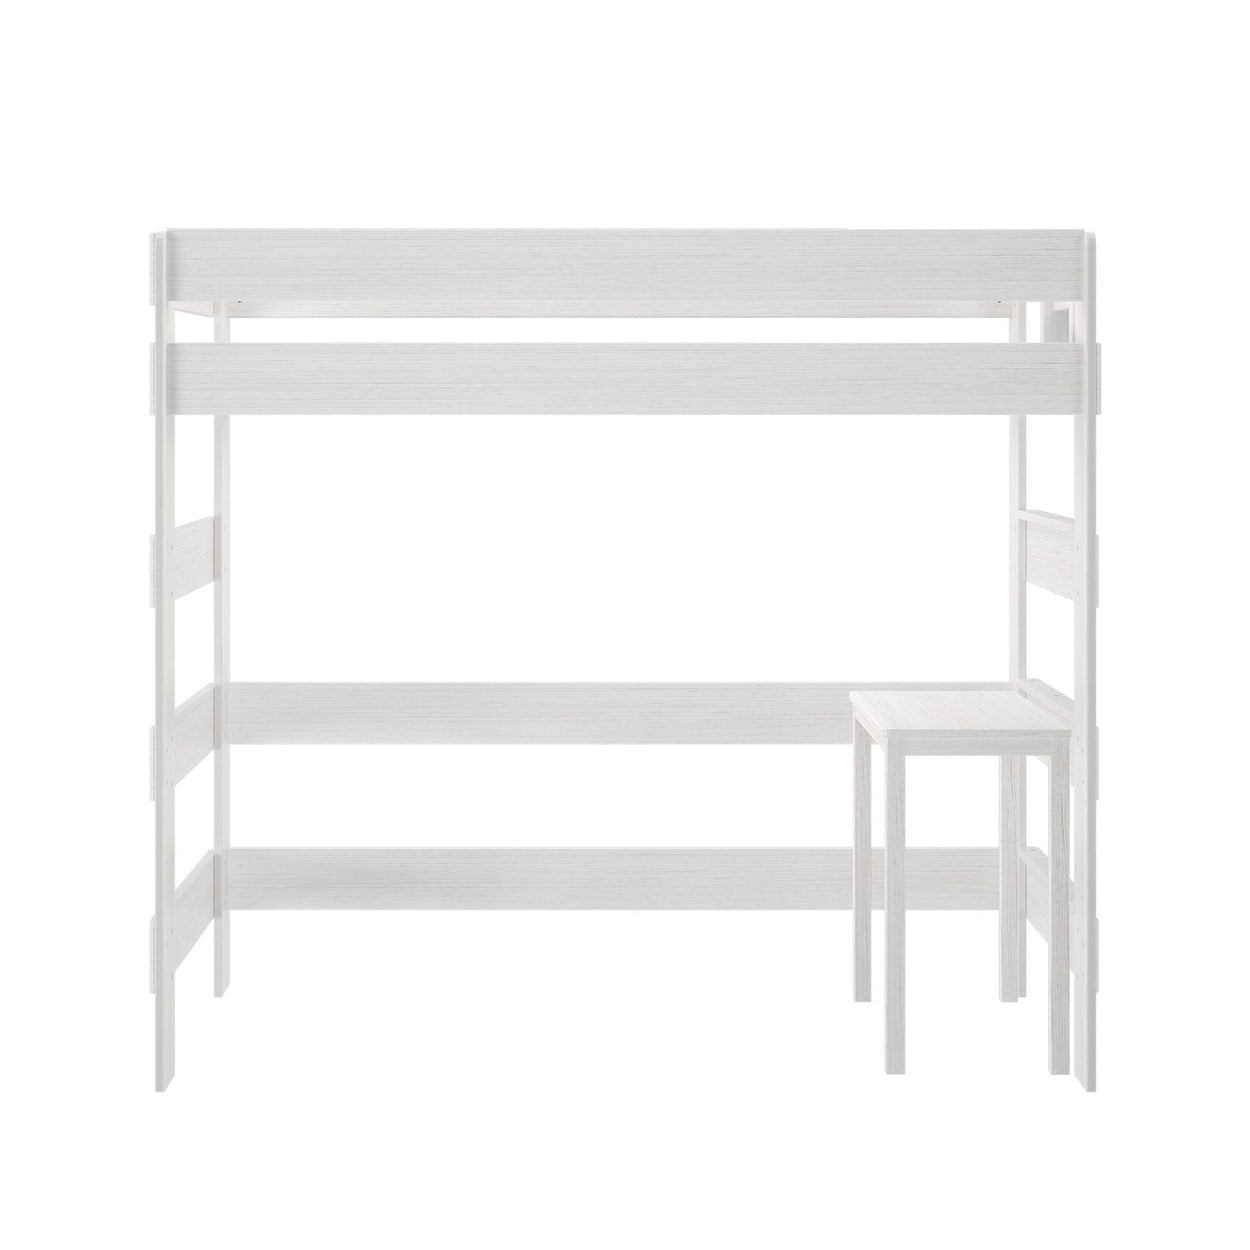 Loft Beds Max & Lily Modern Farmhouse Twin-Size High Loft Bed with Desk 